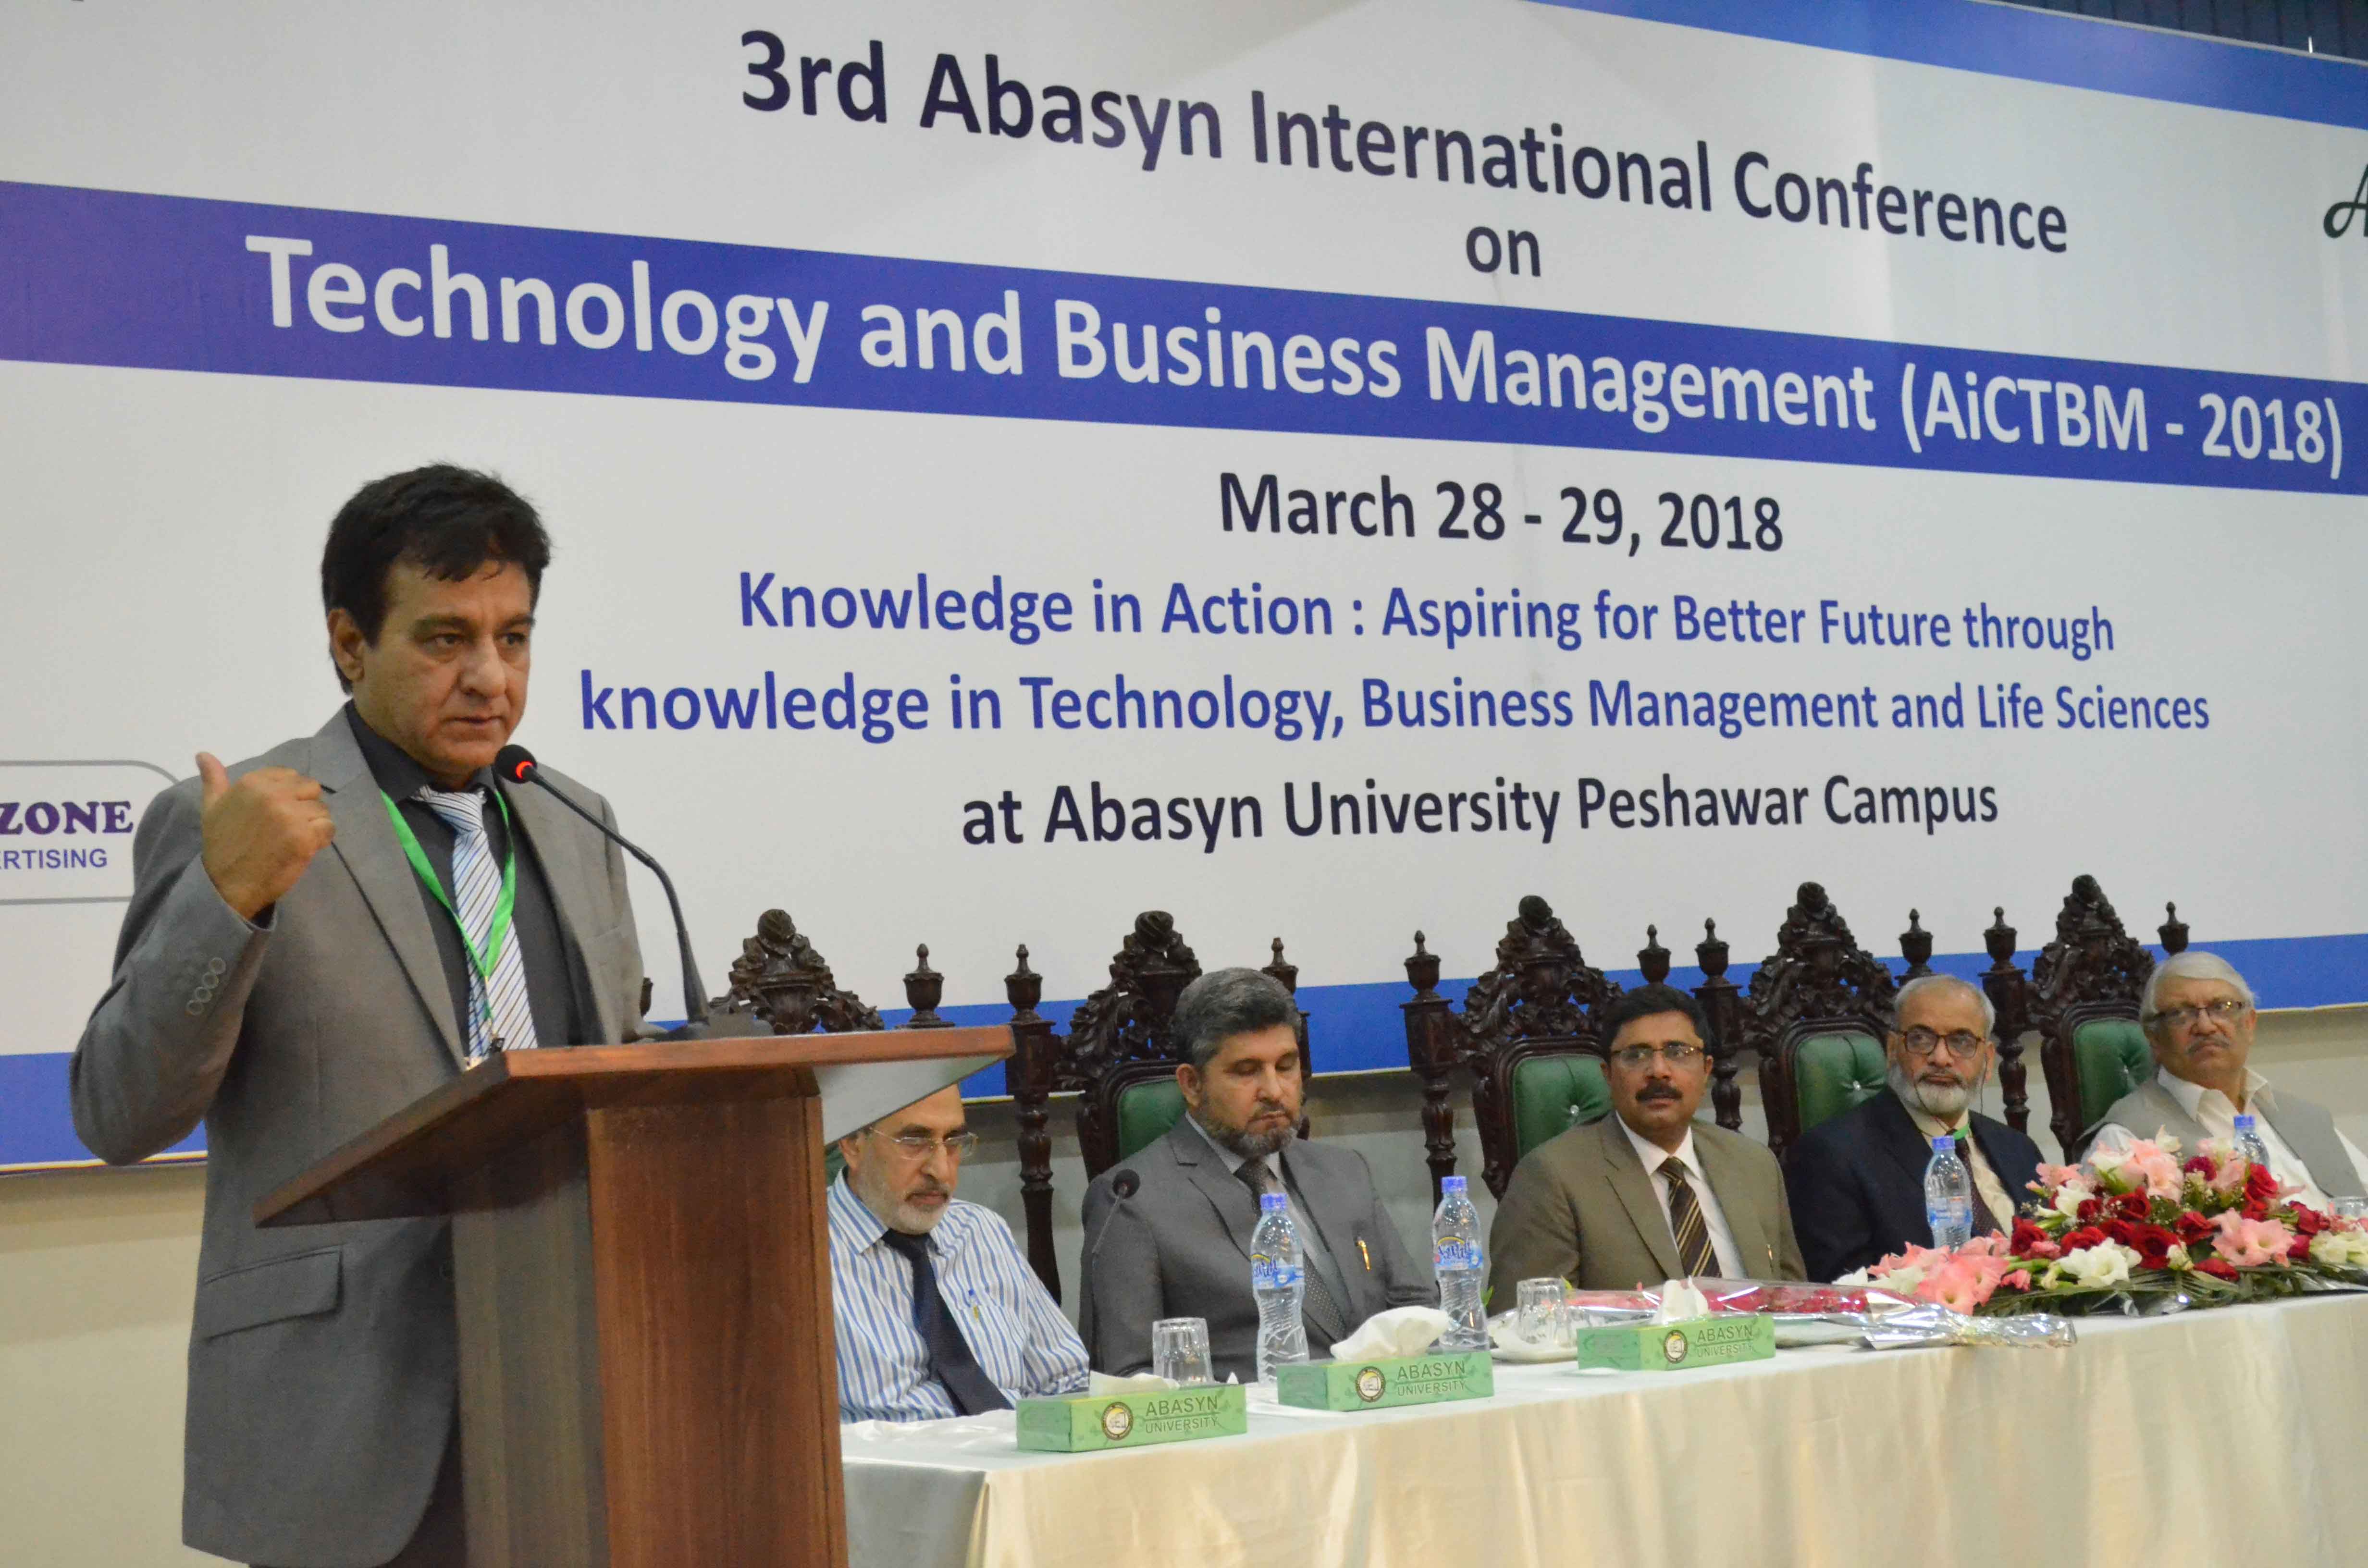 Dr. Waqar Alam chief organiser is presenting his views on the 3rd AiCTBM Conference  